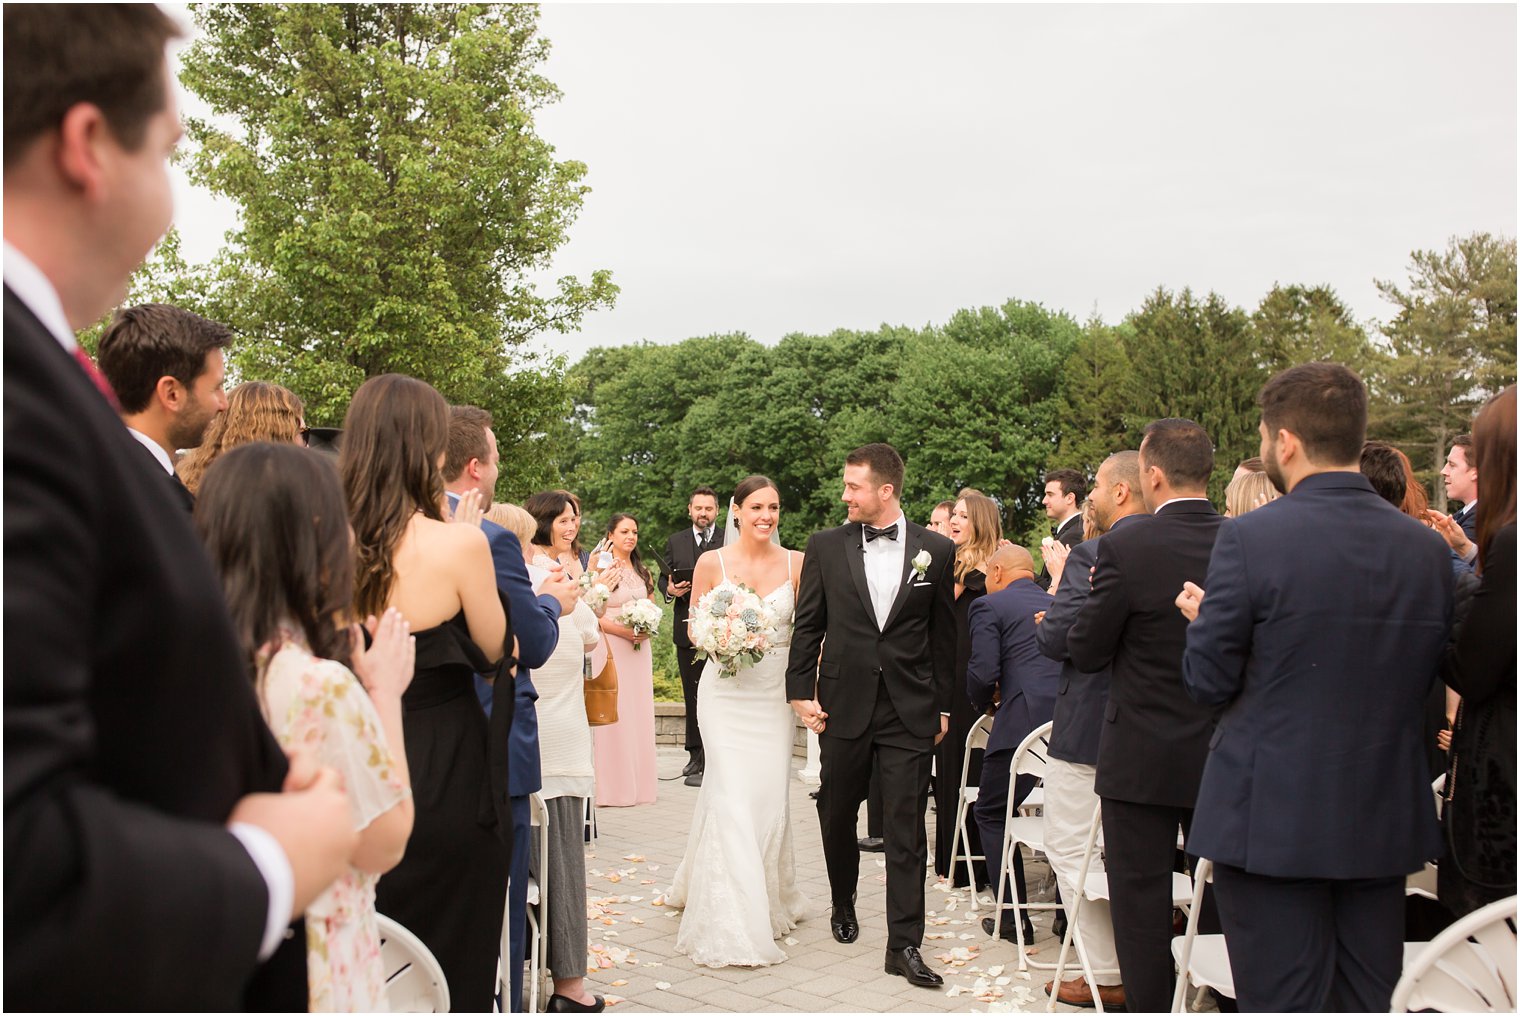 Recessional photo at Windows on the Water at Frogbridge | Photos by Idalia Photography